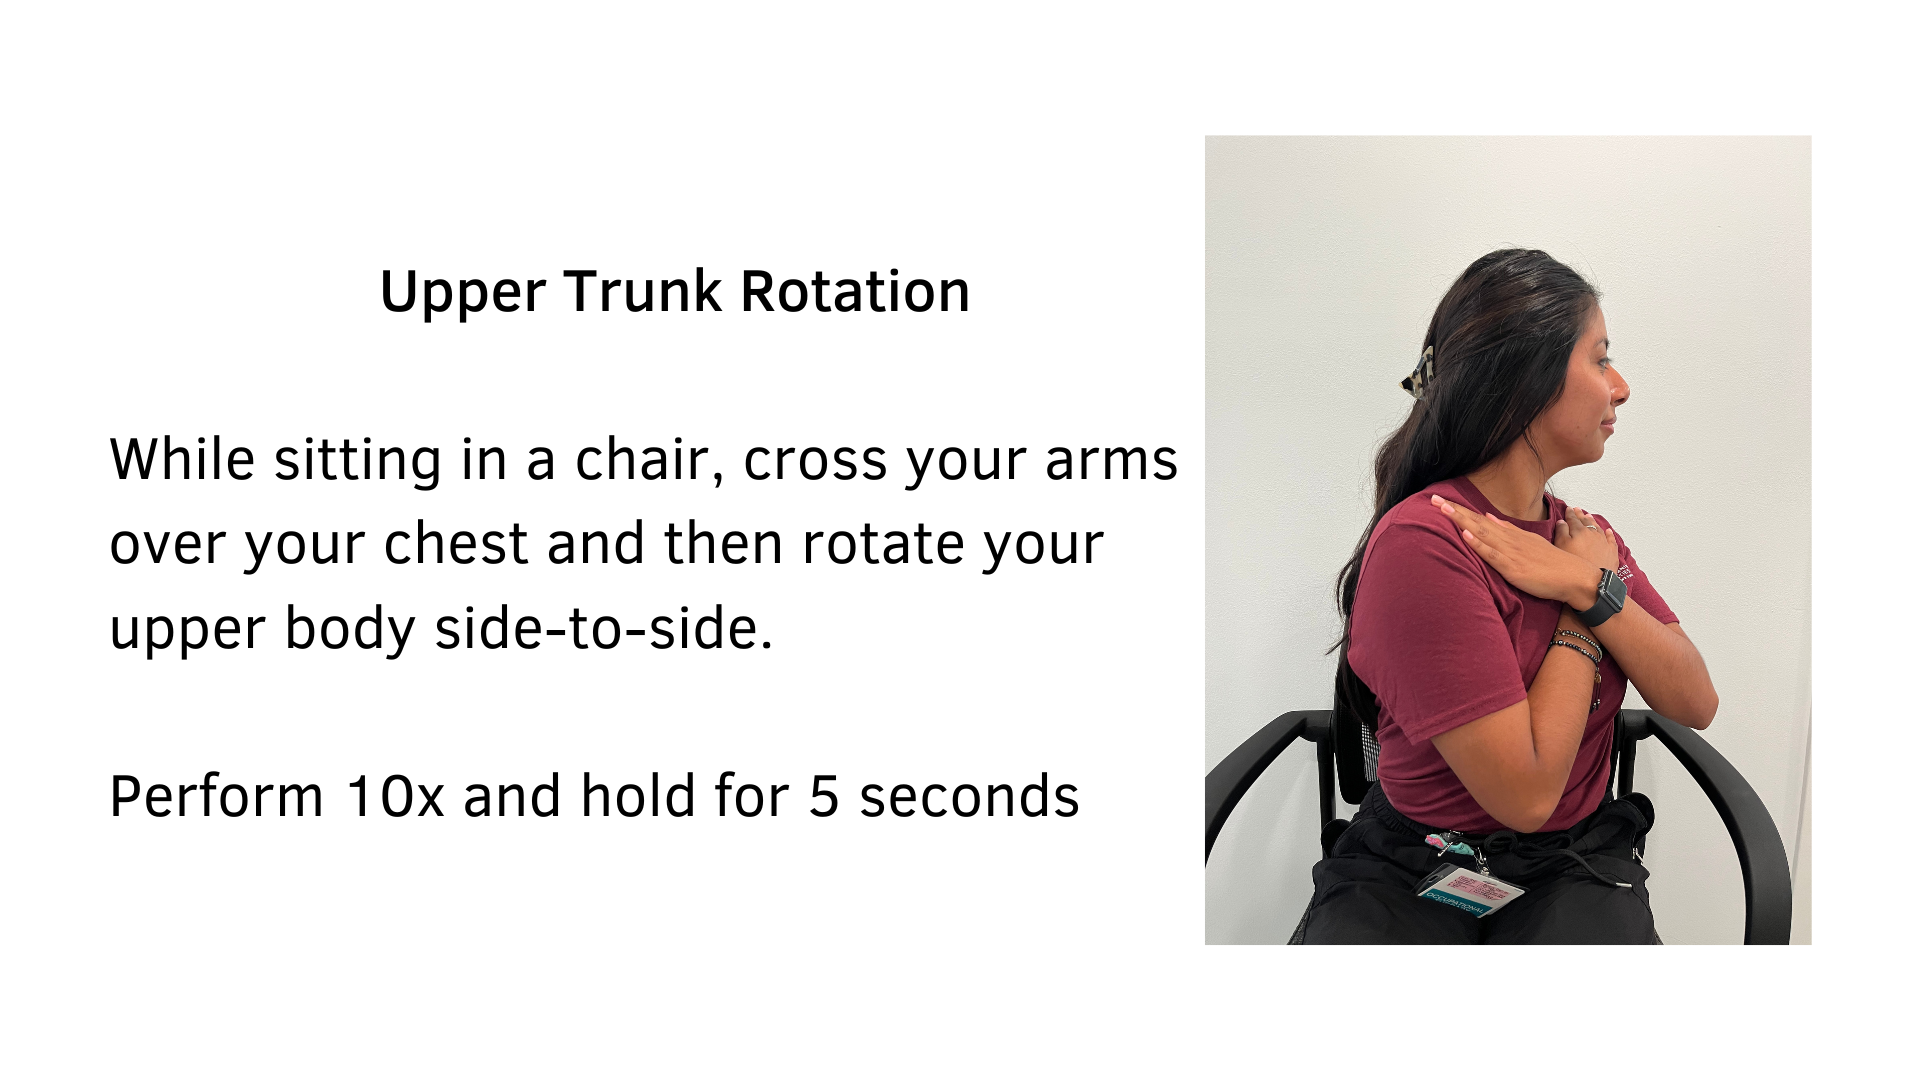 Black text on a white background that reads, "Upper Trunk Rotation: While sitting in a chair, cross your arms over your chest and then rotate your upper body side-to-side. Perform 10x and hold for 5 seconds". A picture of a woman sitting in a chair demonstrating the stretch is featured.